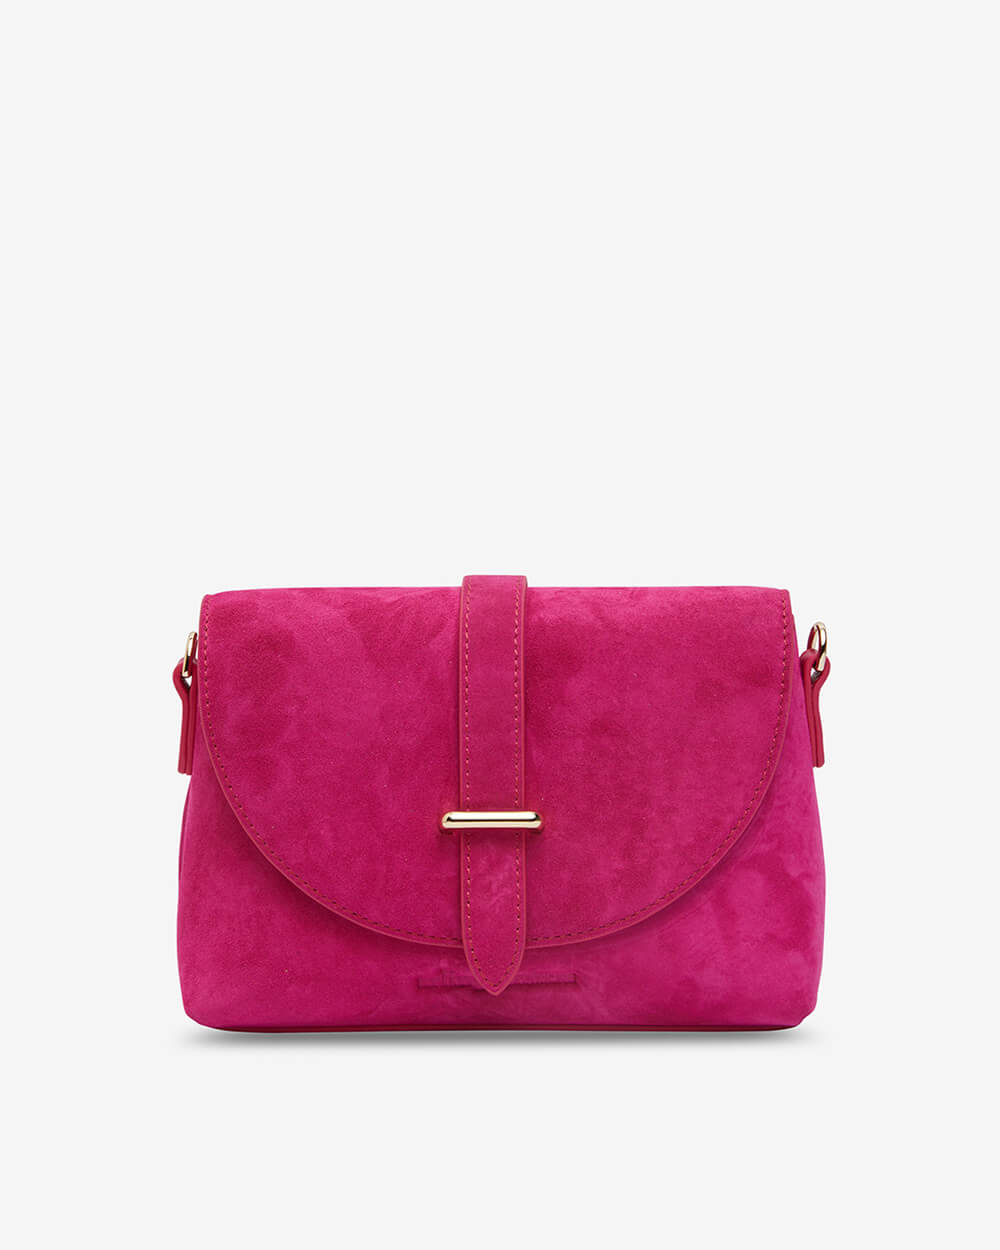 Tote suede leather bag in PINK. Soft natural genuine leather shopper b –  Handmade suede bags by Good Times Barcelona